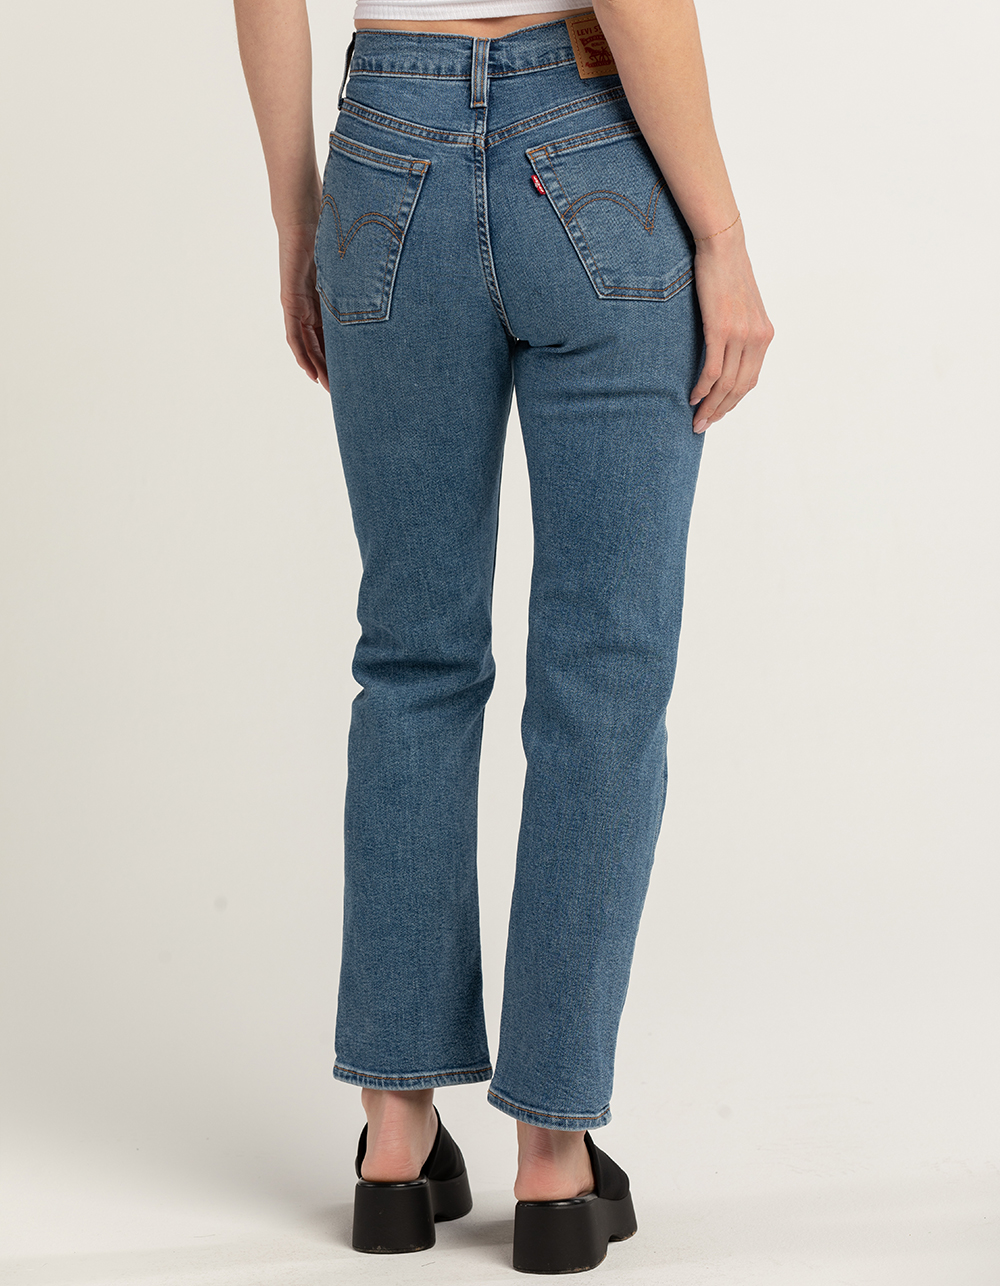 Levi's Wedgie fit: a review (and a love affair) - THE STYLING DUTCHMAN.